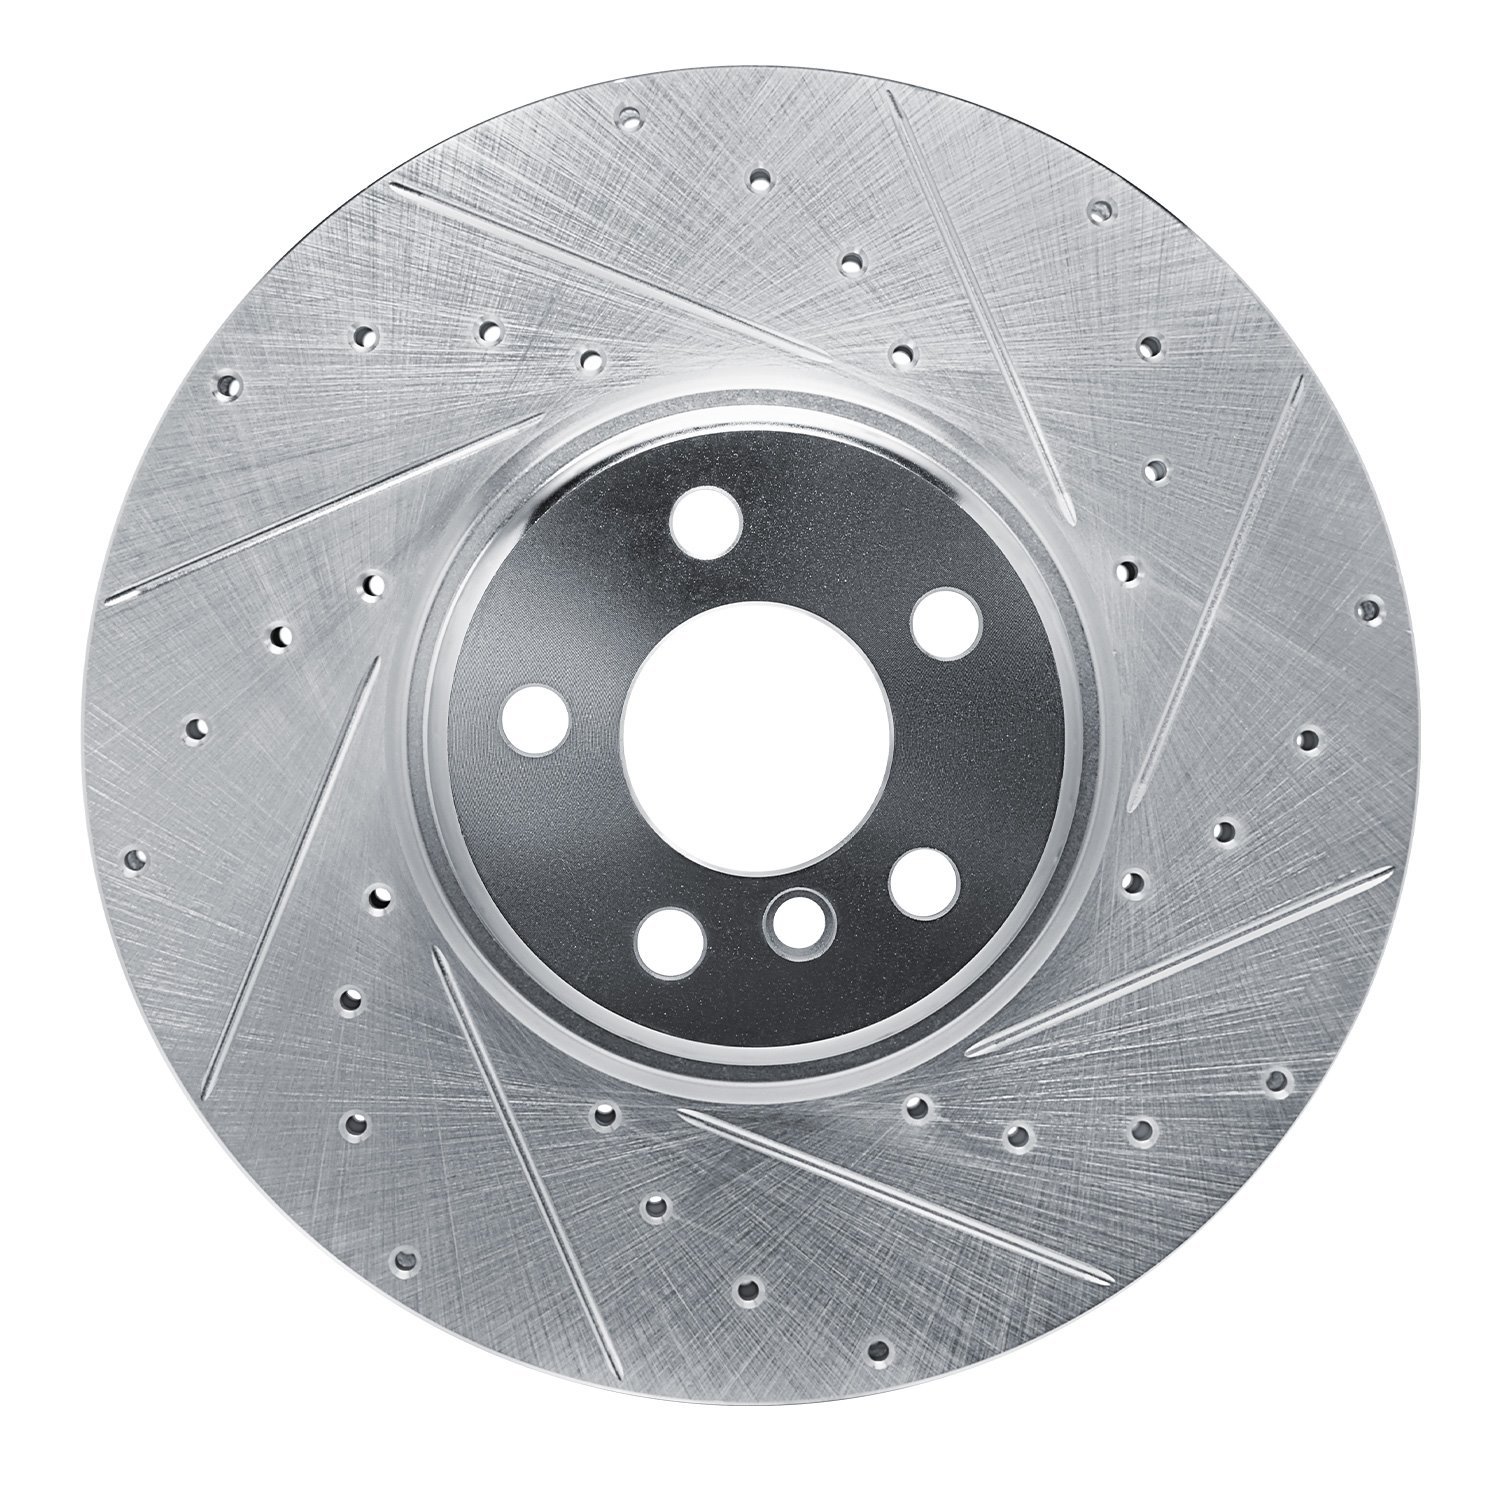 E-Line Drilled & Slotted Silver Brake Rotor, Fits Select Fits Multiple Makes/Models, Position: Left Front